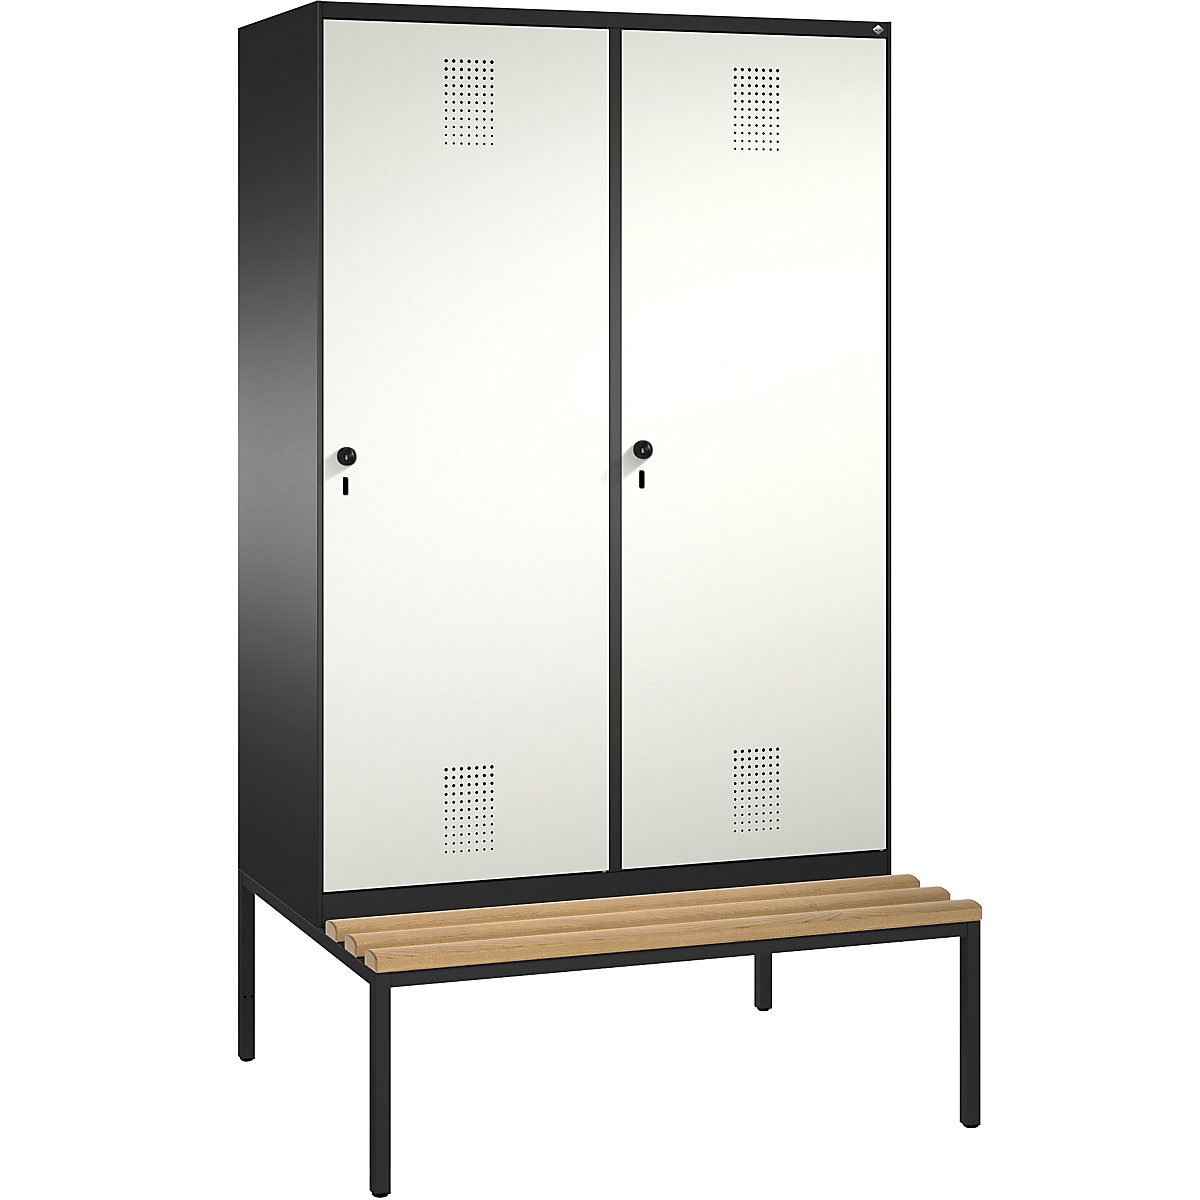 EVOLO cloakroom locker, with bench, door for 2 compartments – C+P, 4 compartments, 2 doors, compartment width 300 mm, black grey / pure white-13